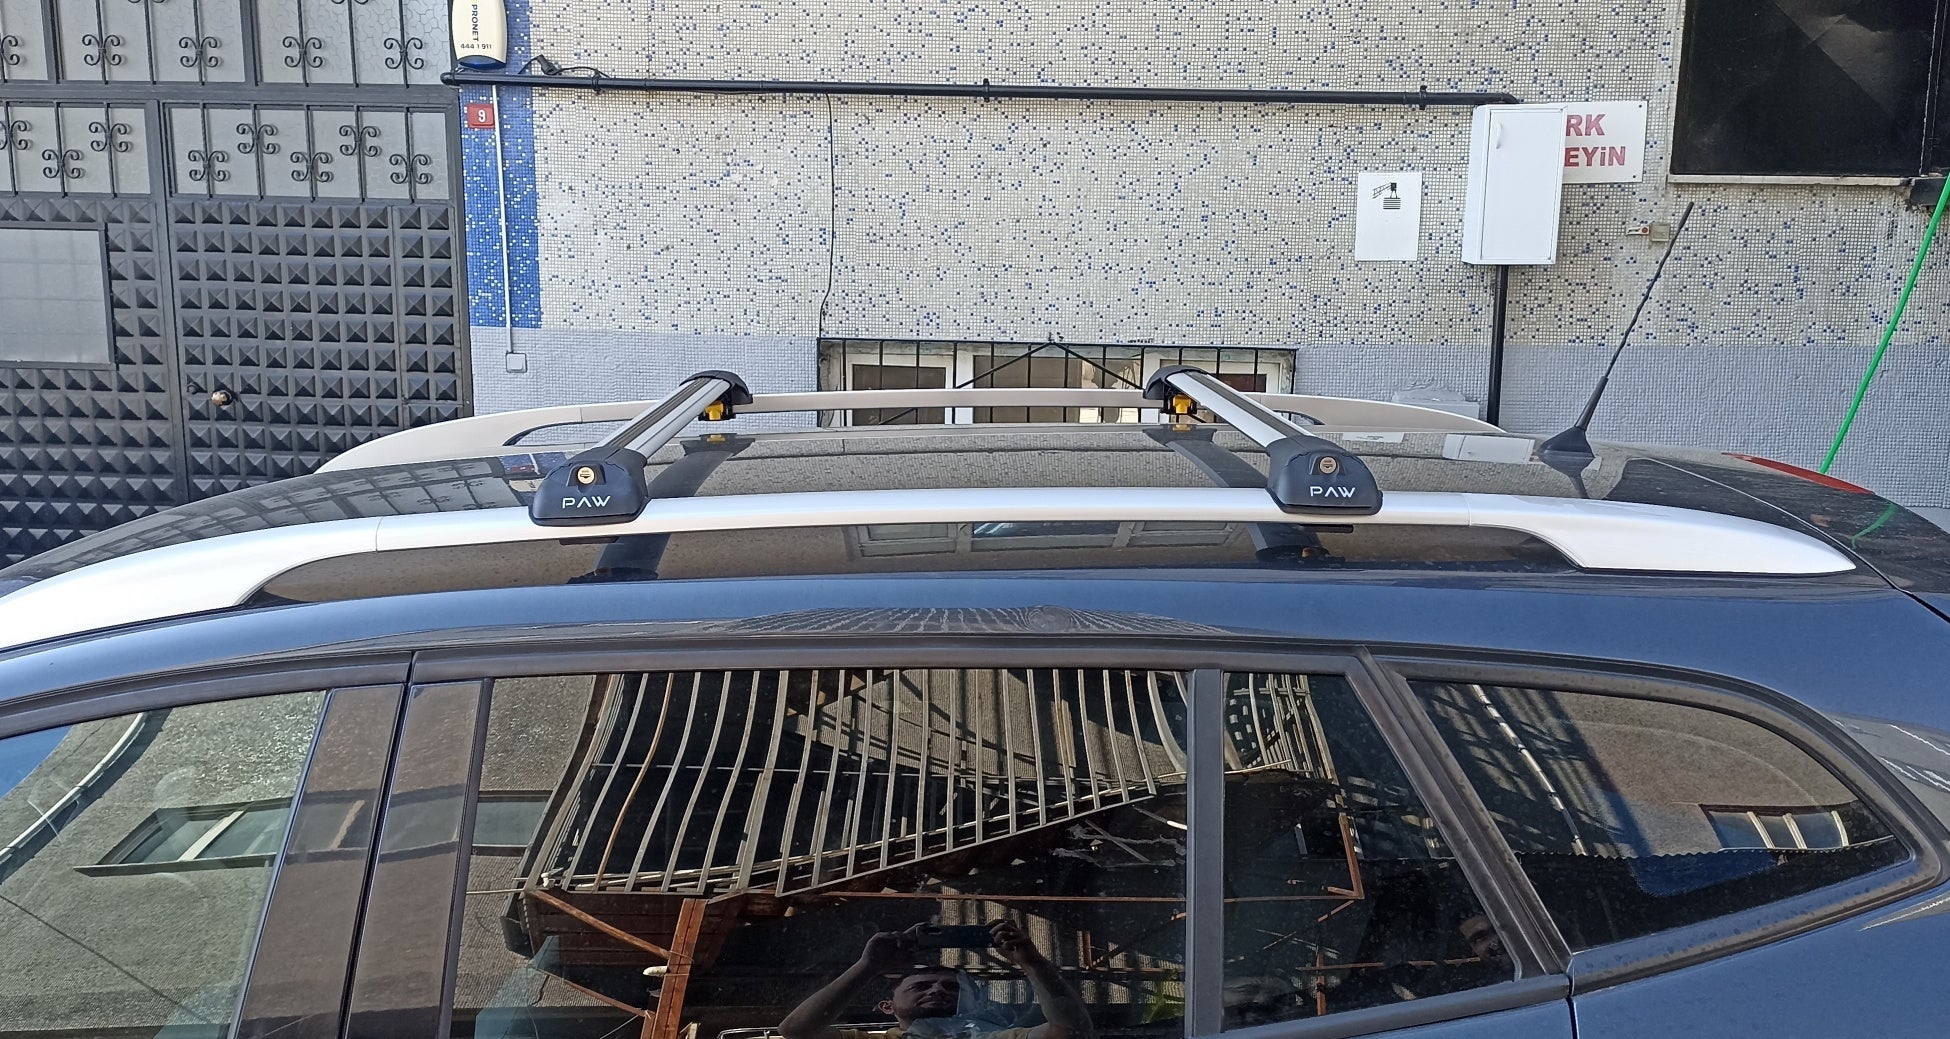 For Mazda Tribute 2001-2007 Roof Rack System Carrier Cross Bars Aluminum Lockable High Quality of Metal Bracket Silver